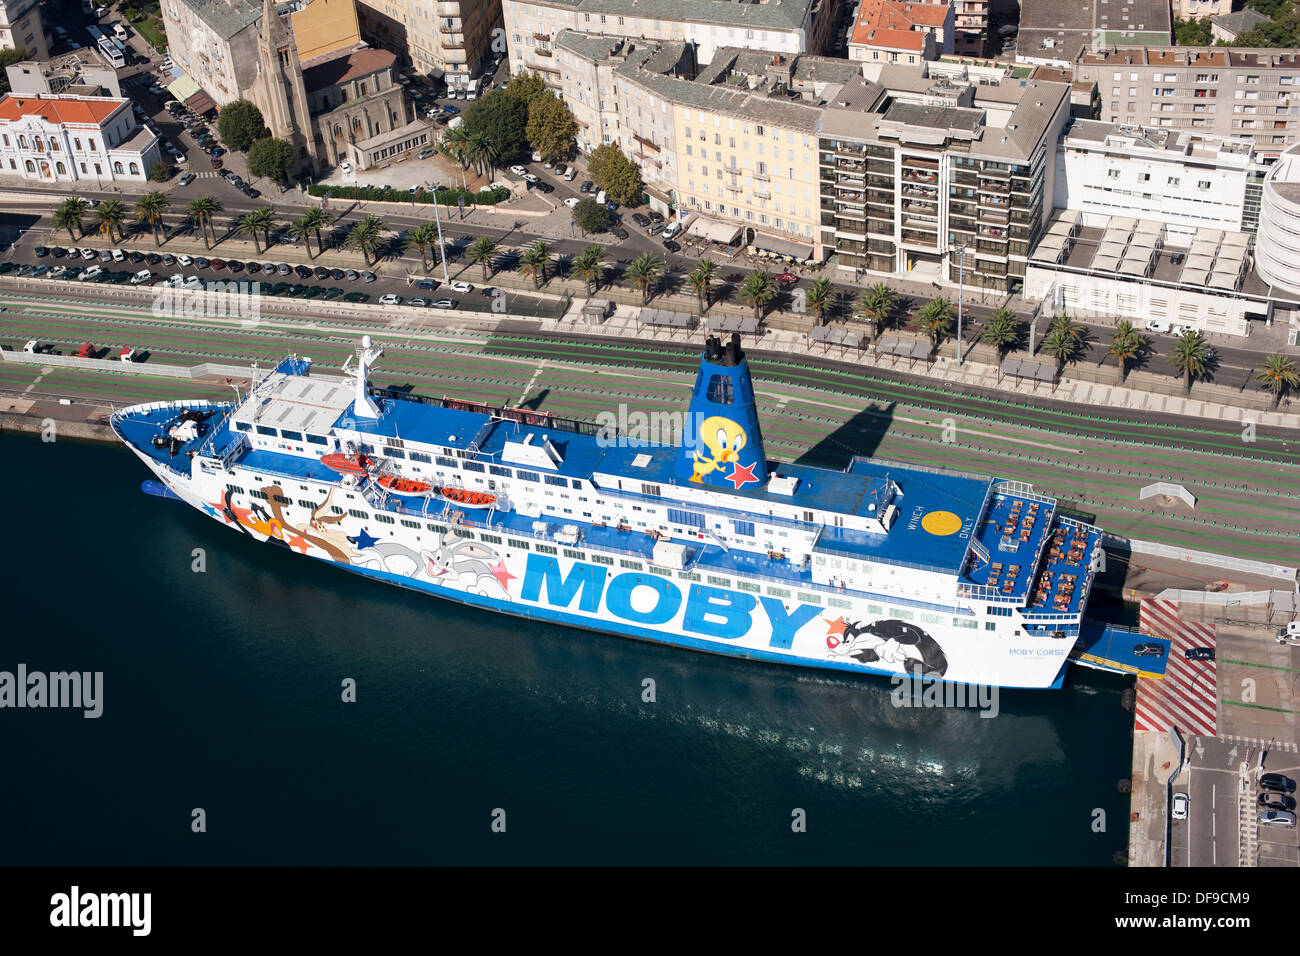 AERIAL VIEW. Vehicles embarking on a ferryboat in Saint-Nicolas Port. Bastia, Corsica, France. Stock Photo